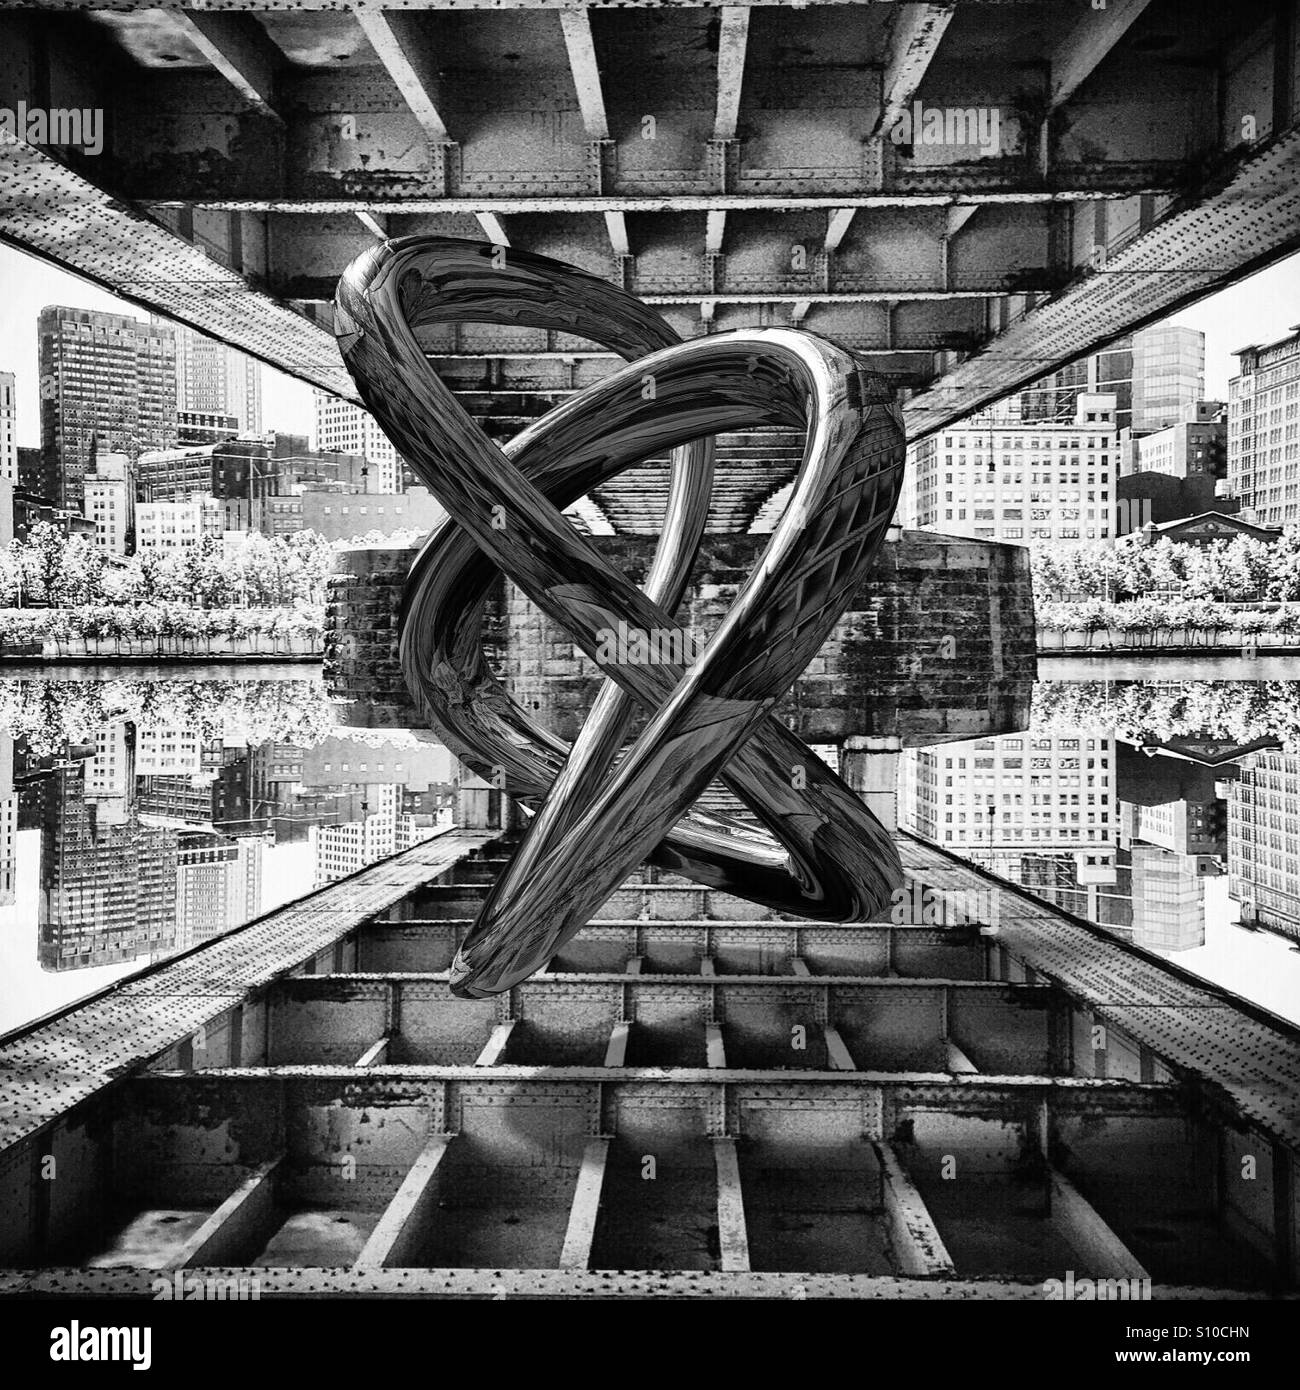 An abstract black and white image of the underside of a bridge with a futuristic metal object and a city skyline. Stock Photo